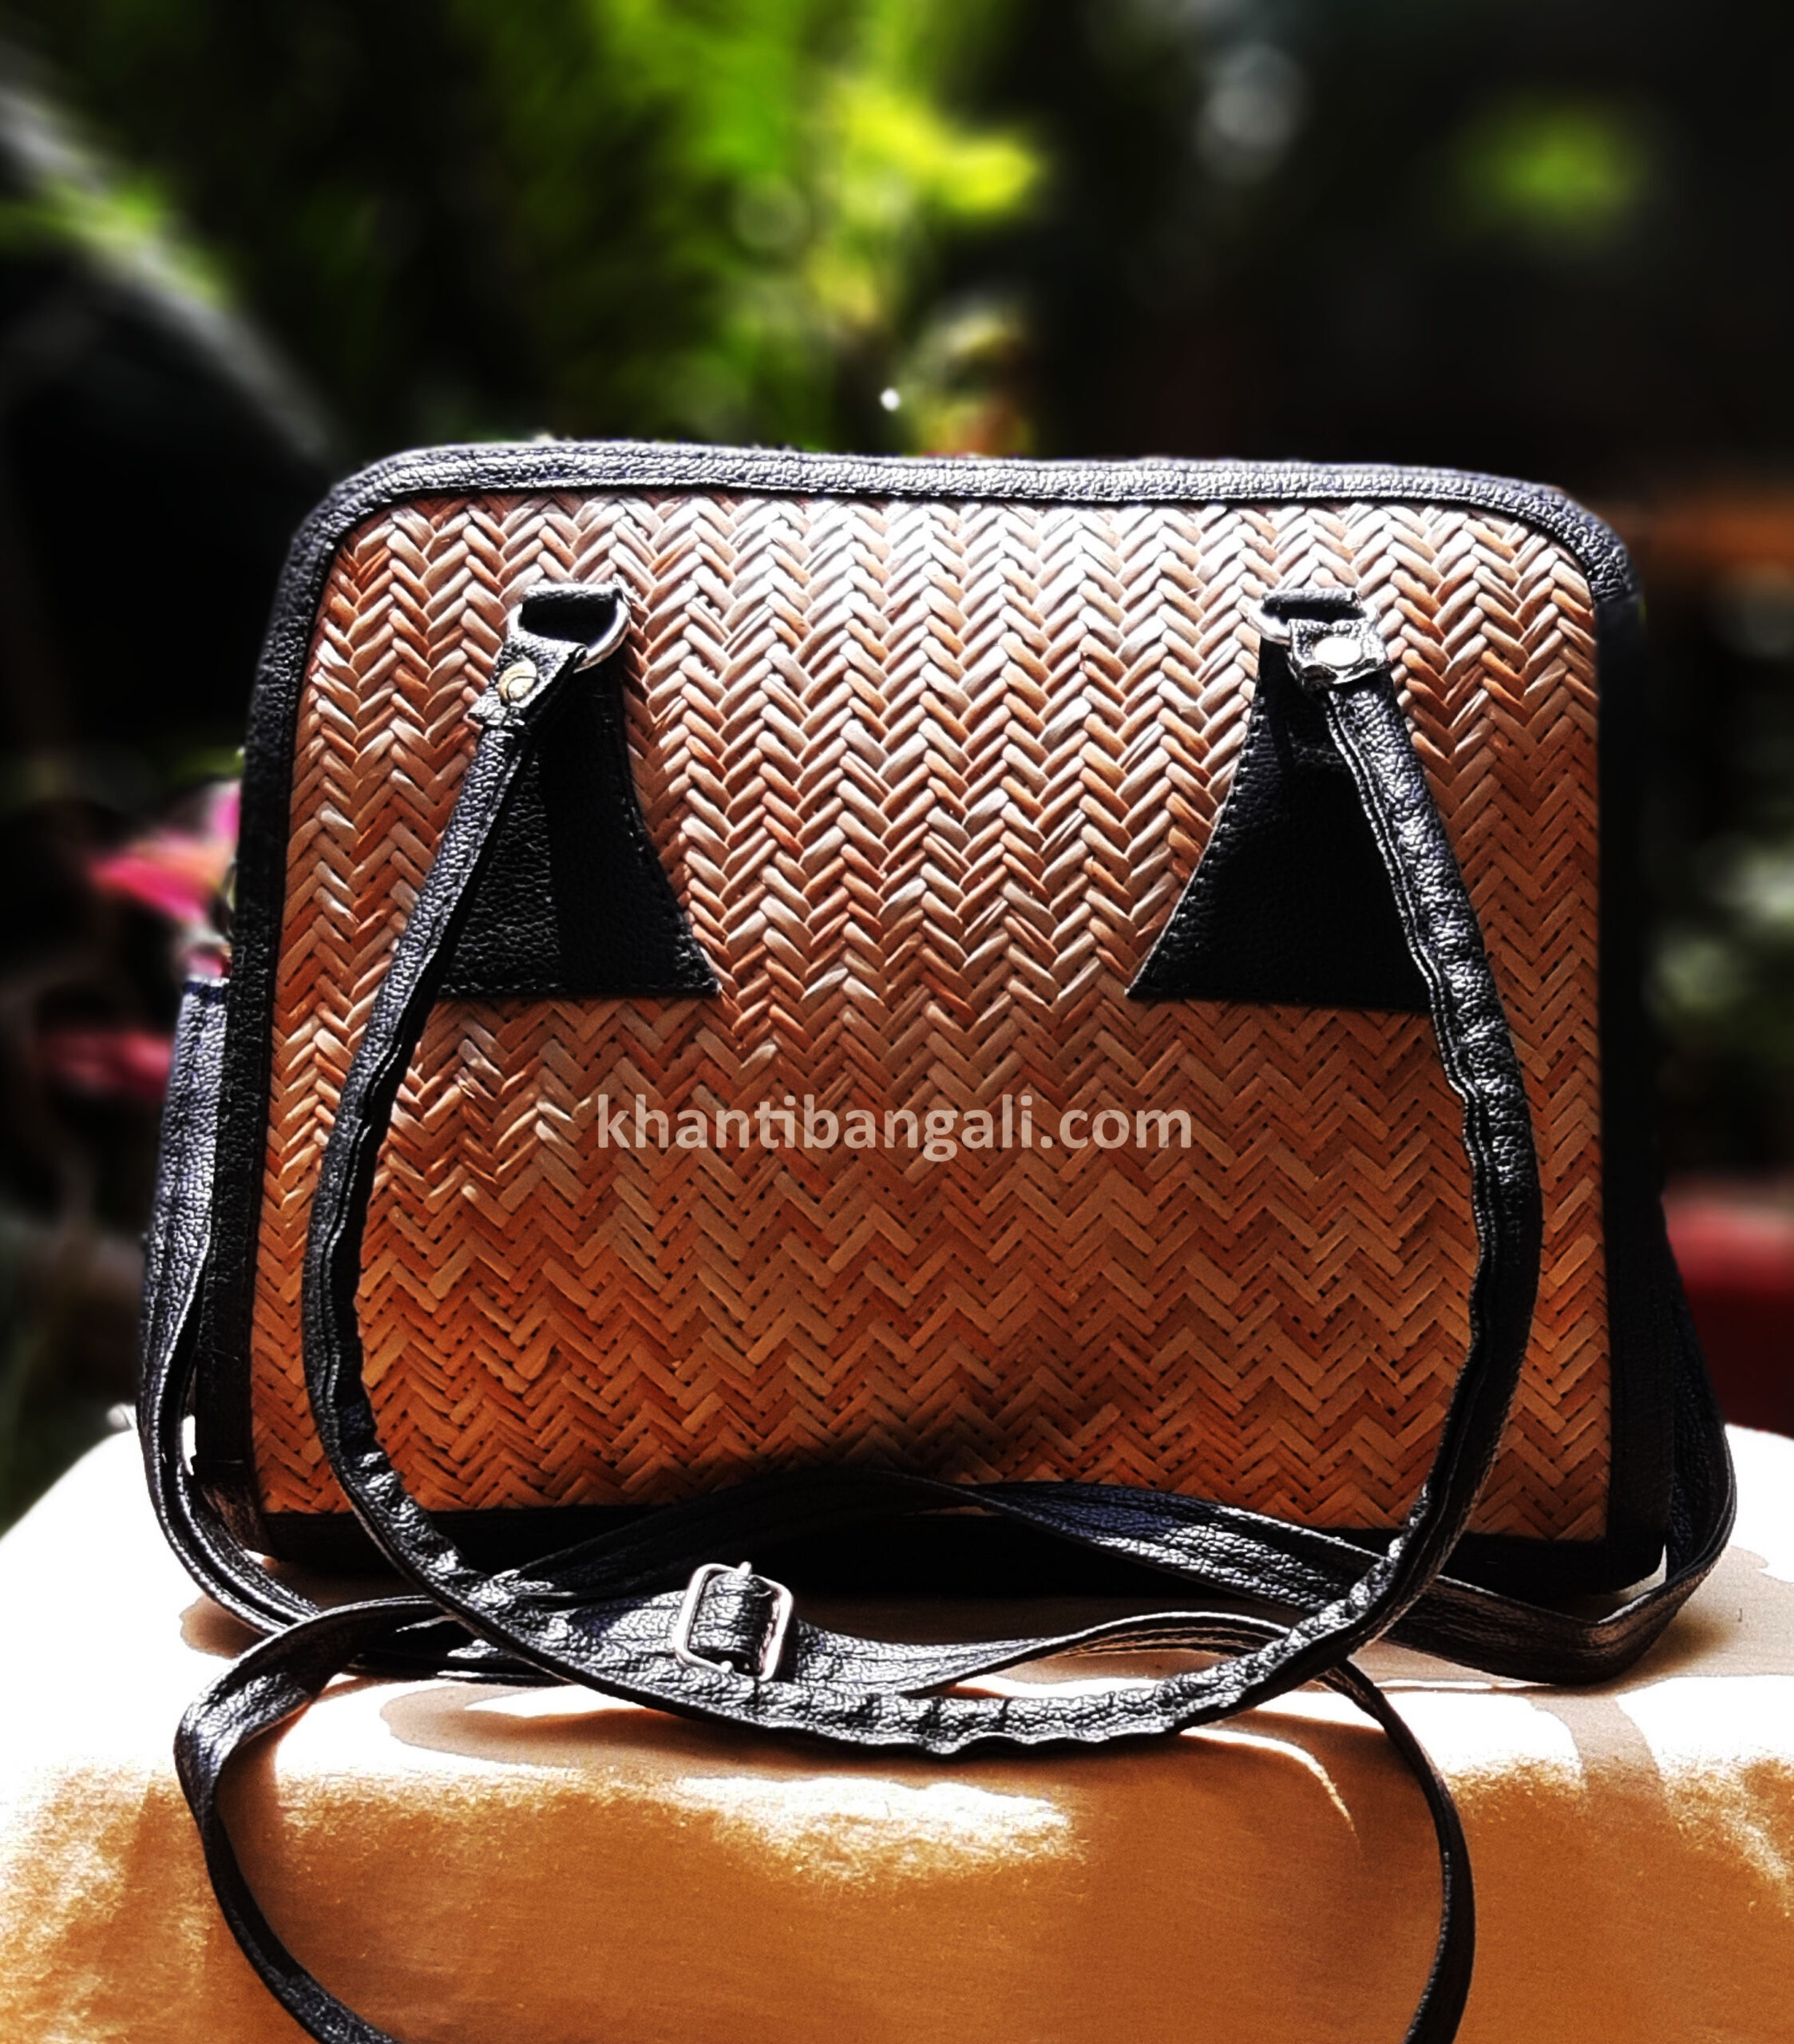 Fancy Vanity Bag - Online Store for Eco-friendly Lifestyle Items!